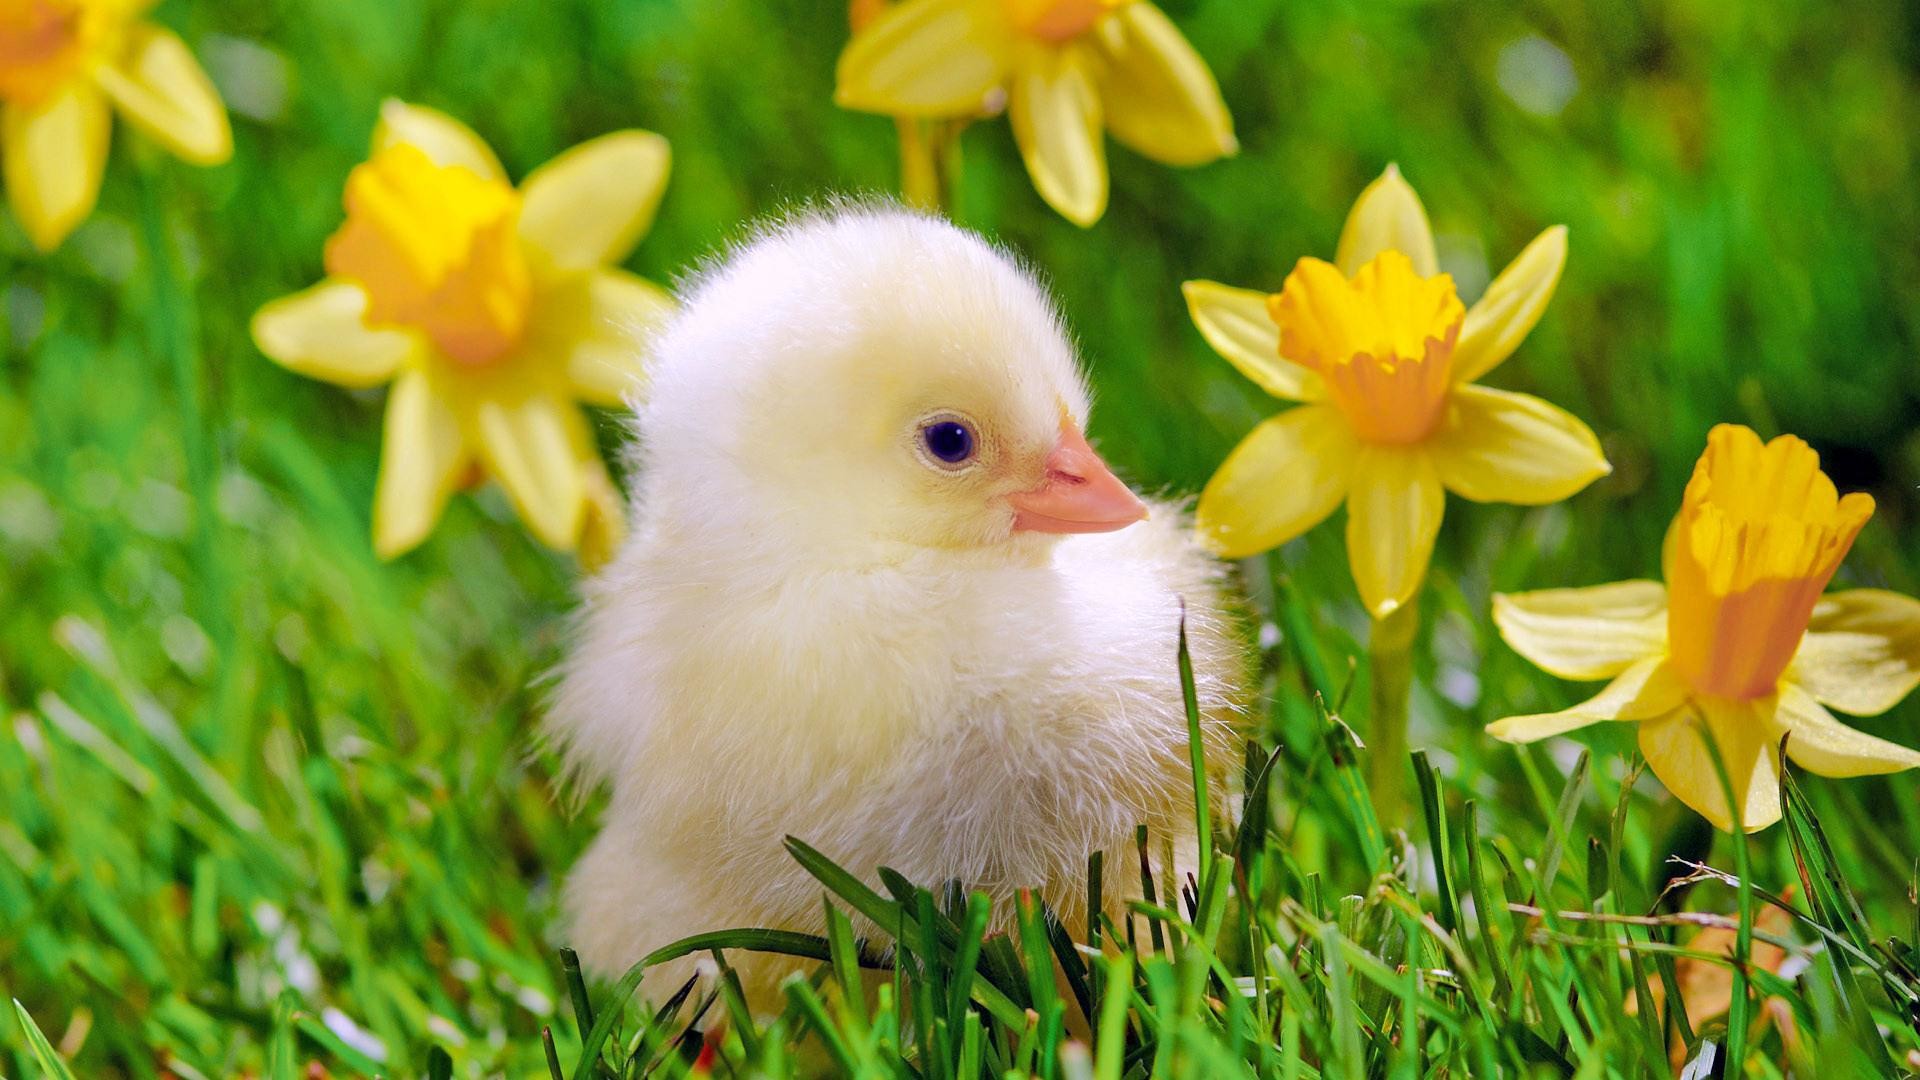 Baby Chicks Hd Wallpapers - Beautiful Baby Chickens - HD Wallpaper 